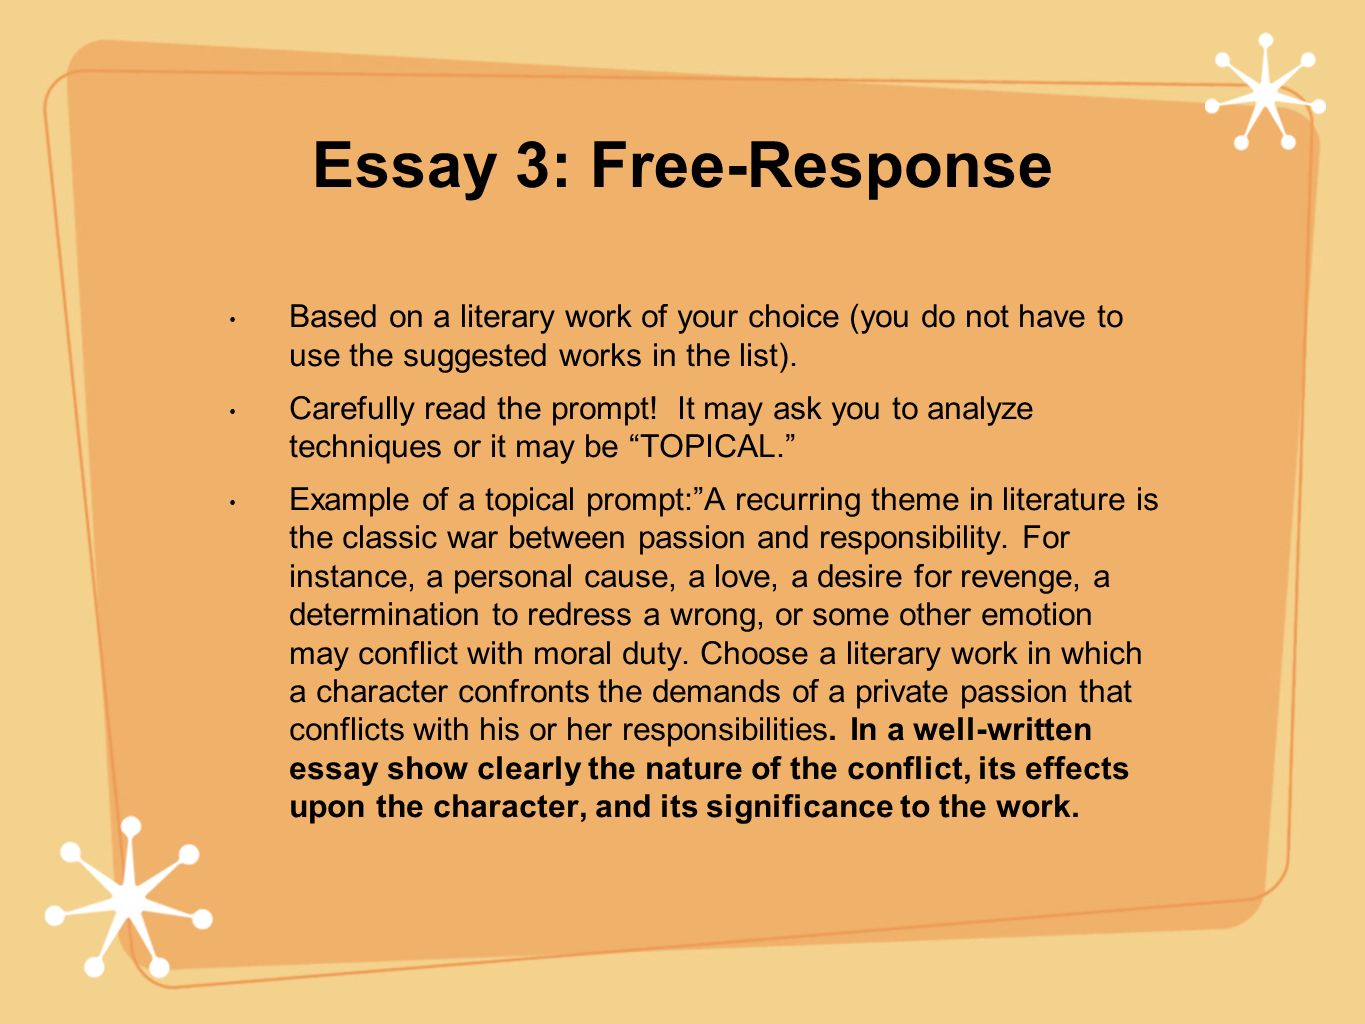 Nature of emotions essay